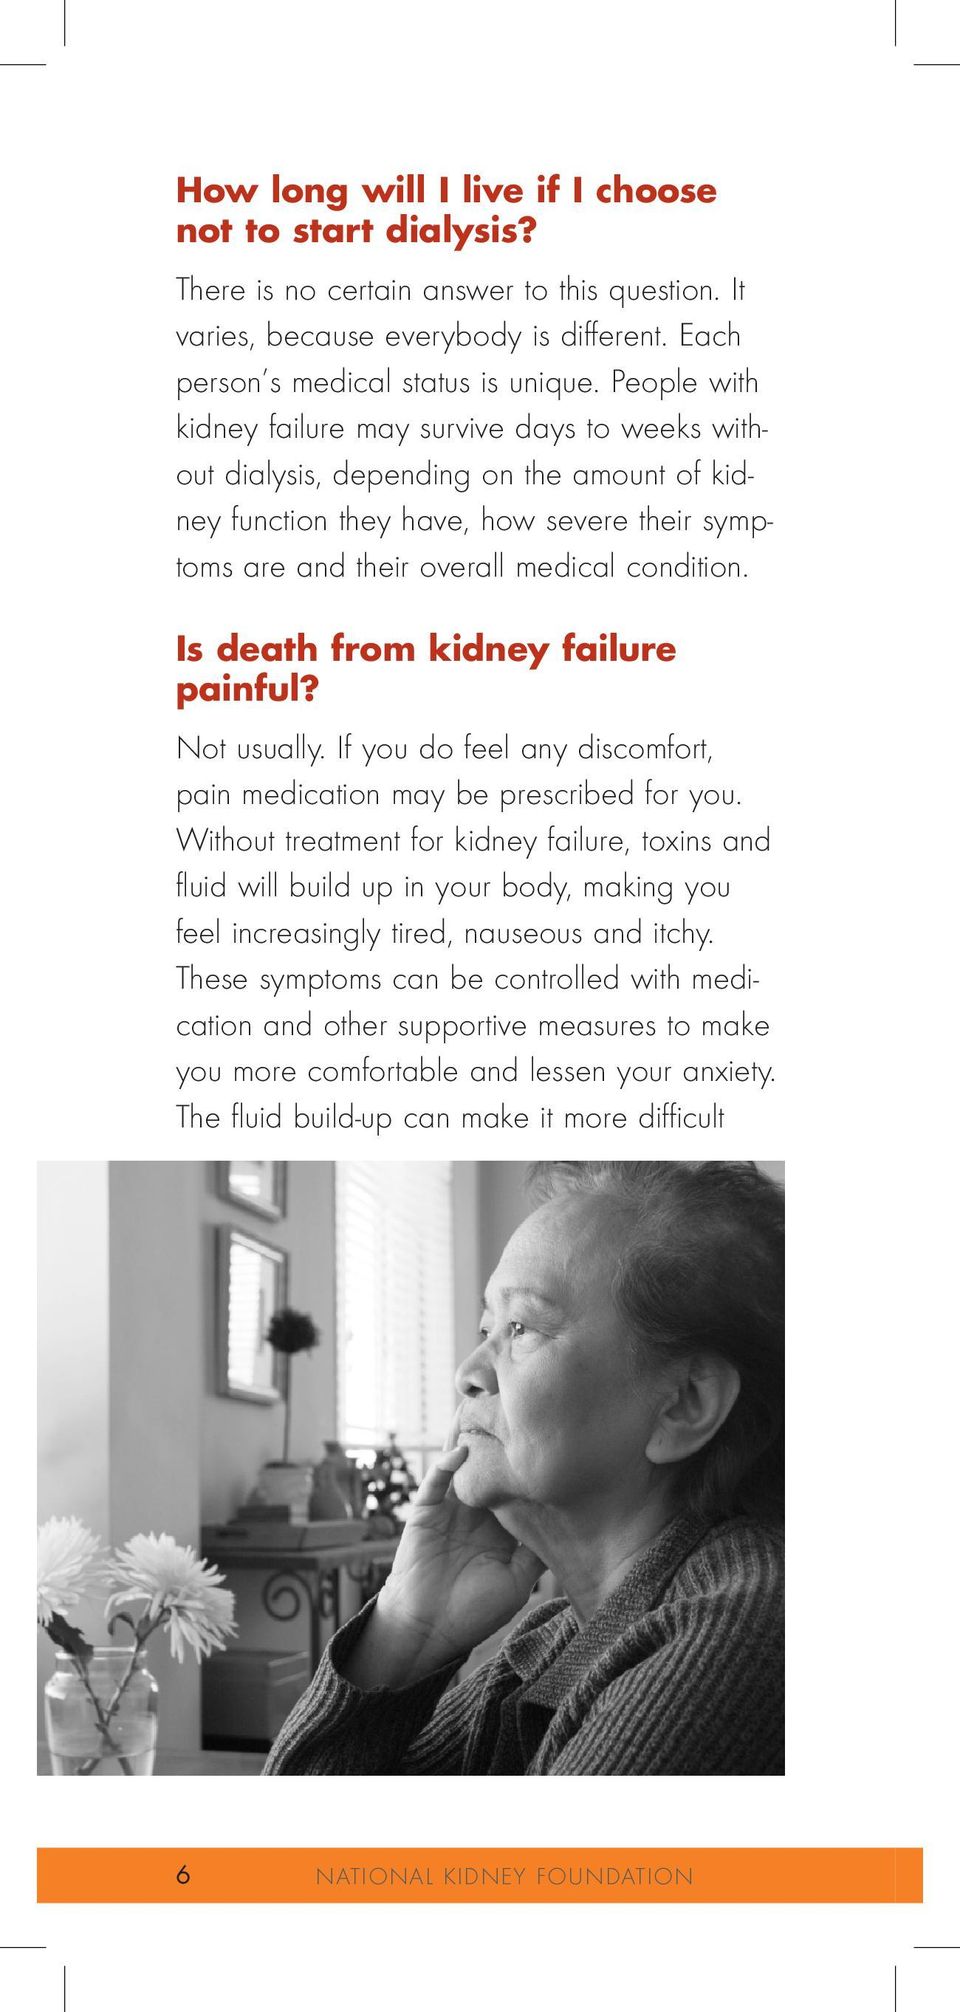 Is death from kidney failure painful? Not usually. If you do feel any discomfort, pain medication may be prescribed for you.